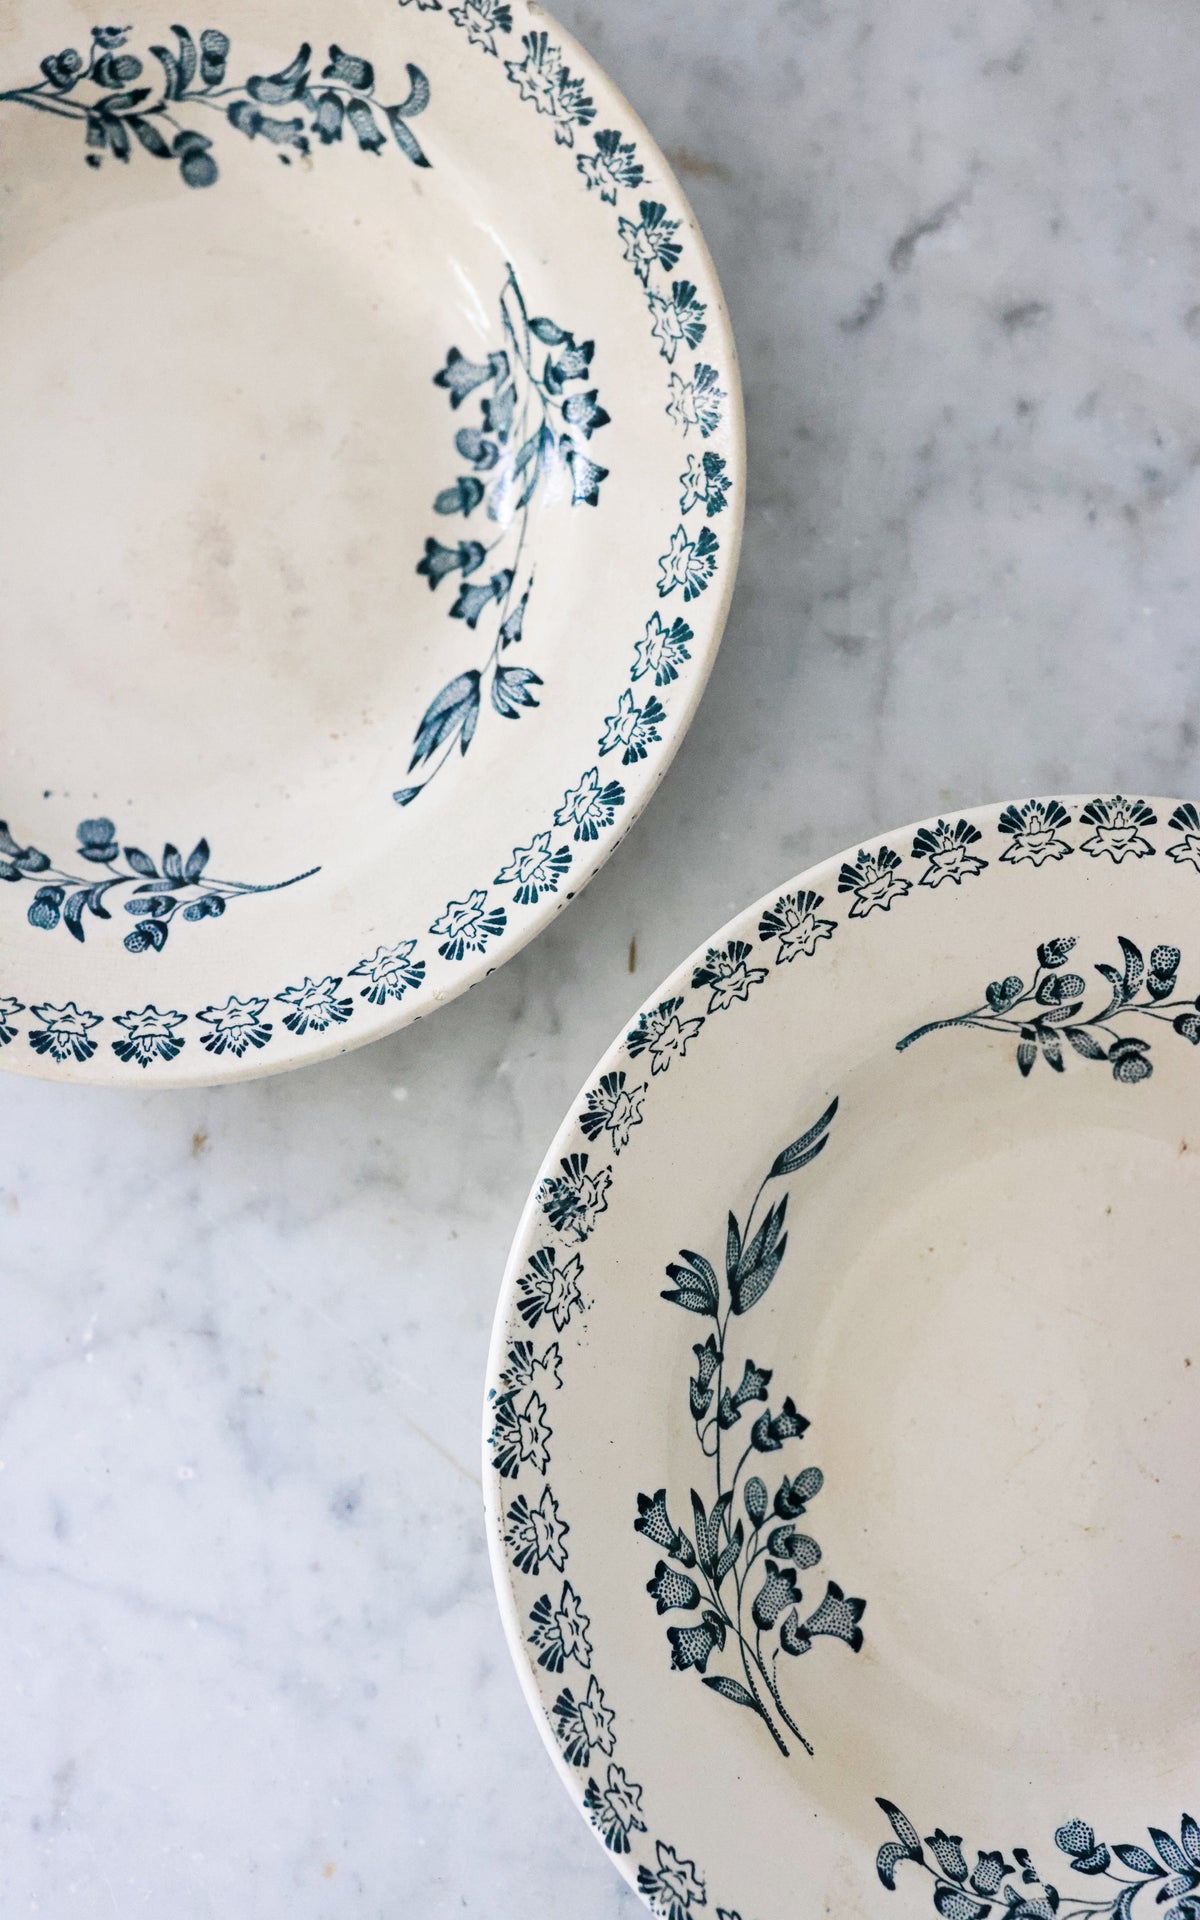 Set of Two Vintage French Ironstone Bowls